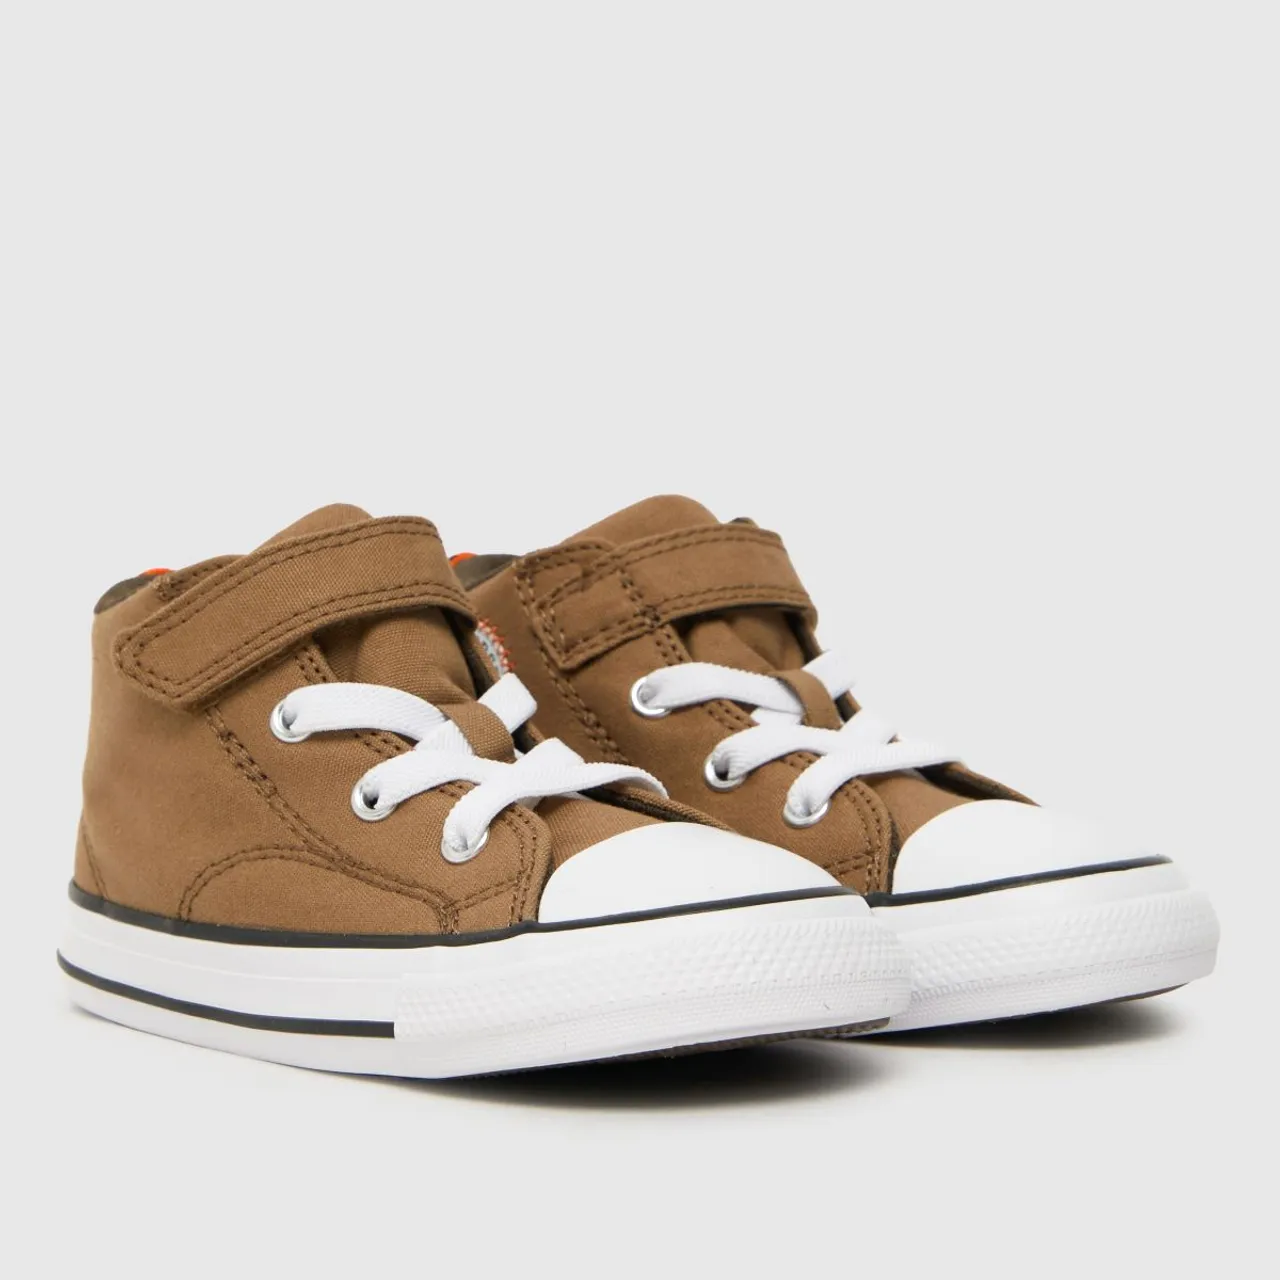 Converse Brown All Star Malden Street V Boys Toddler Trainers